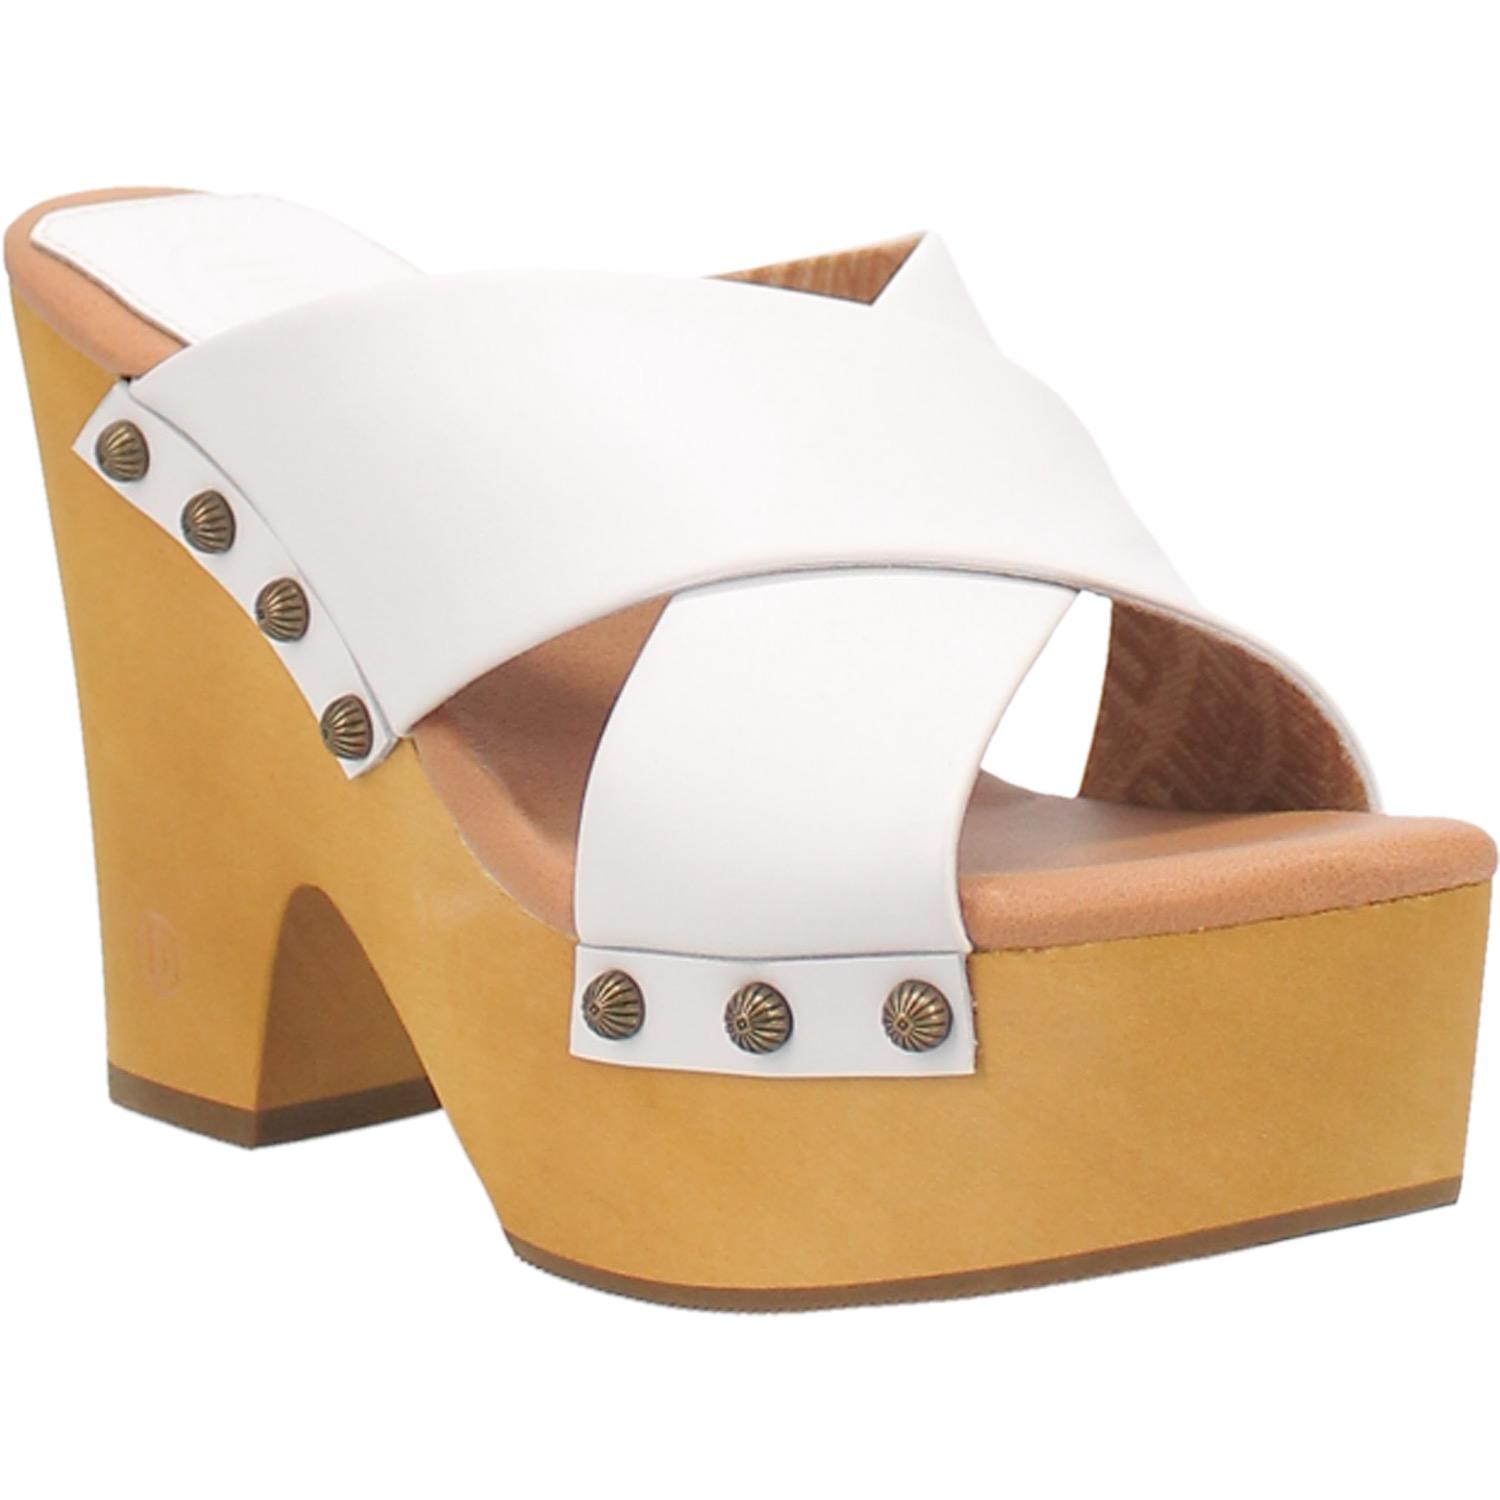 A chunky heeled sandal with two white crossed straps that are fastened in place with round studs. Item is pictured on a plain white background